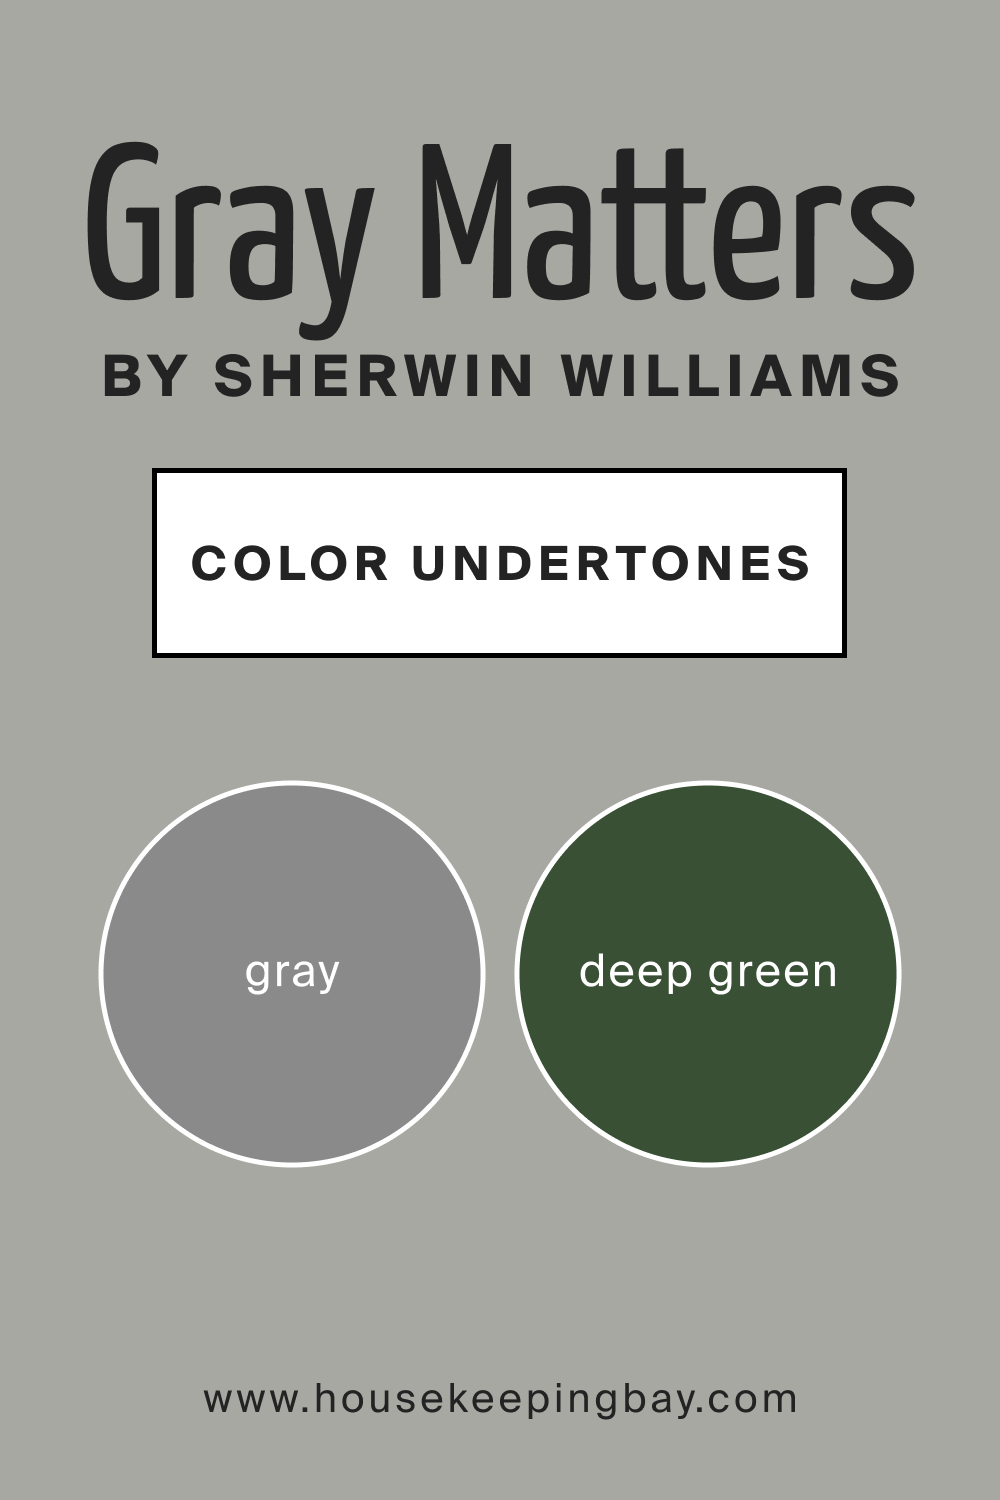 Gray Matters SW 7066 by Sherwin Williams Color Undertones